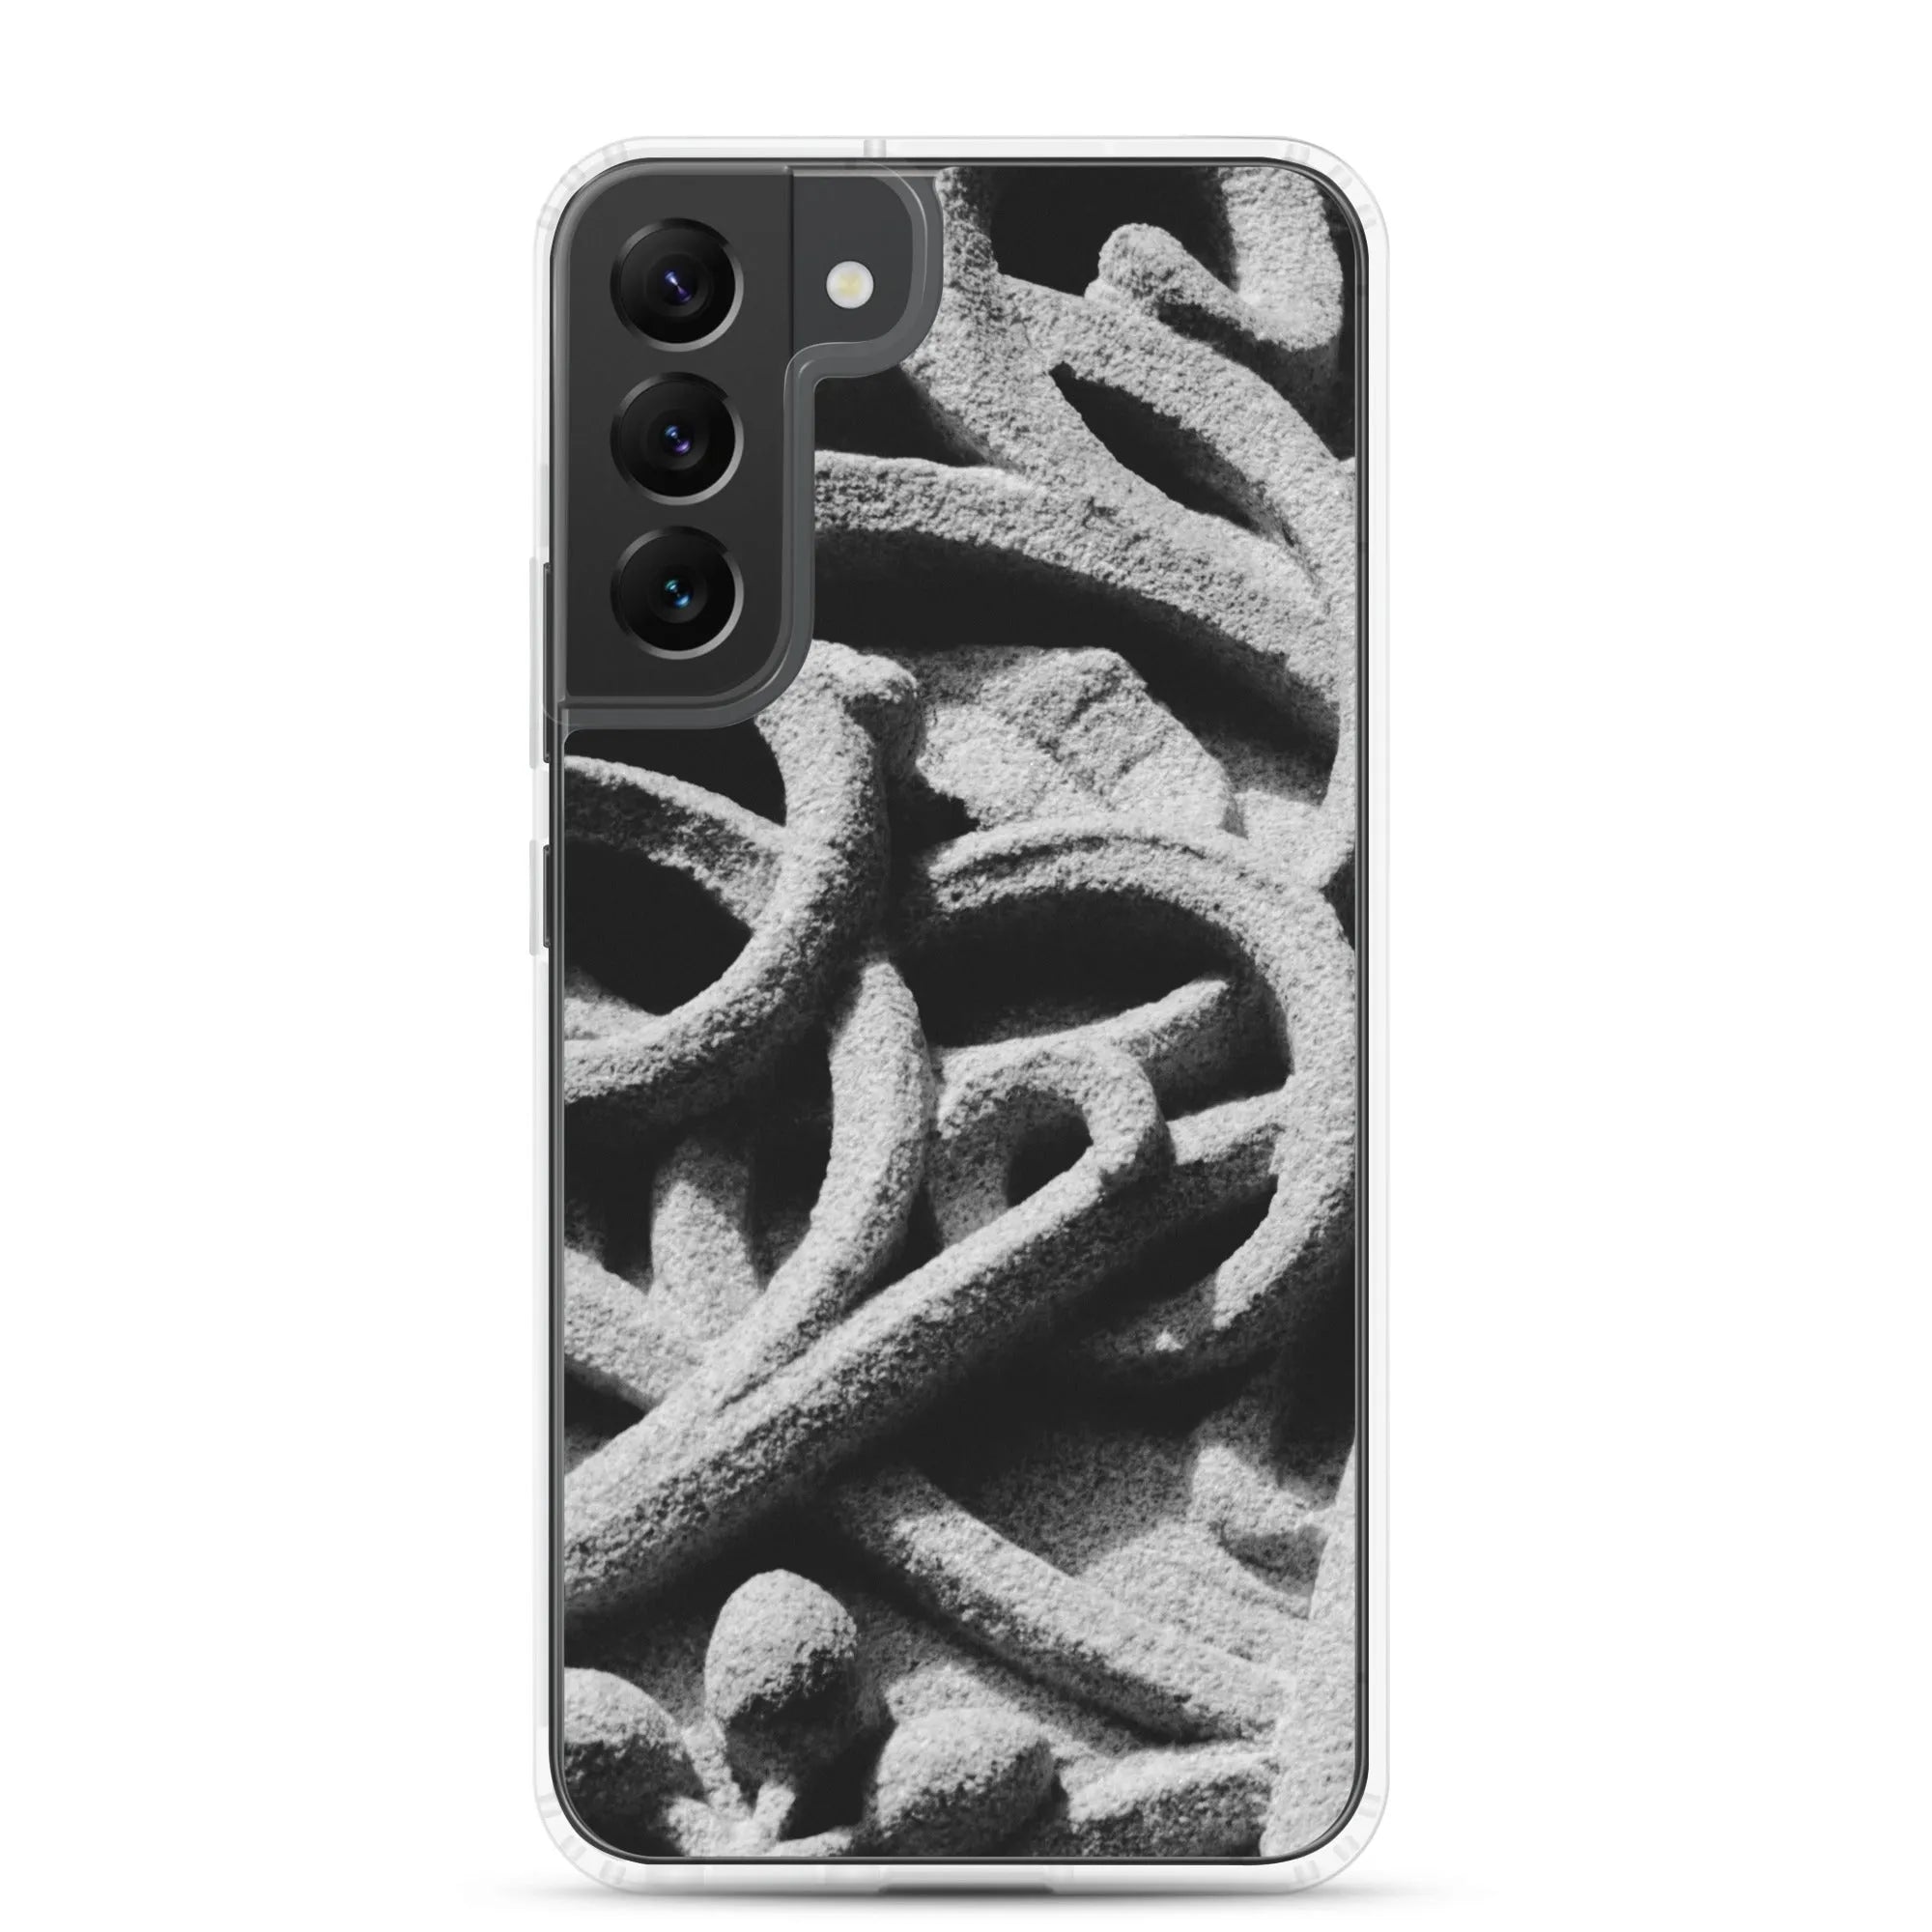 Labyrinth Samsung Galaxy Case - Black And White - Samsung Galaxy S22 Plus - Mobile Phone Cases - Aesthetic Art